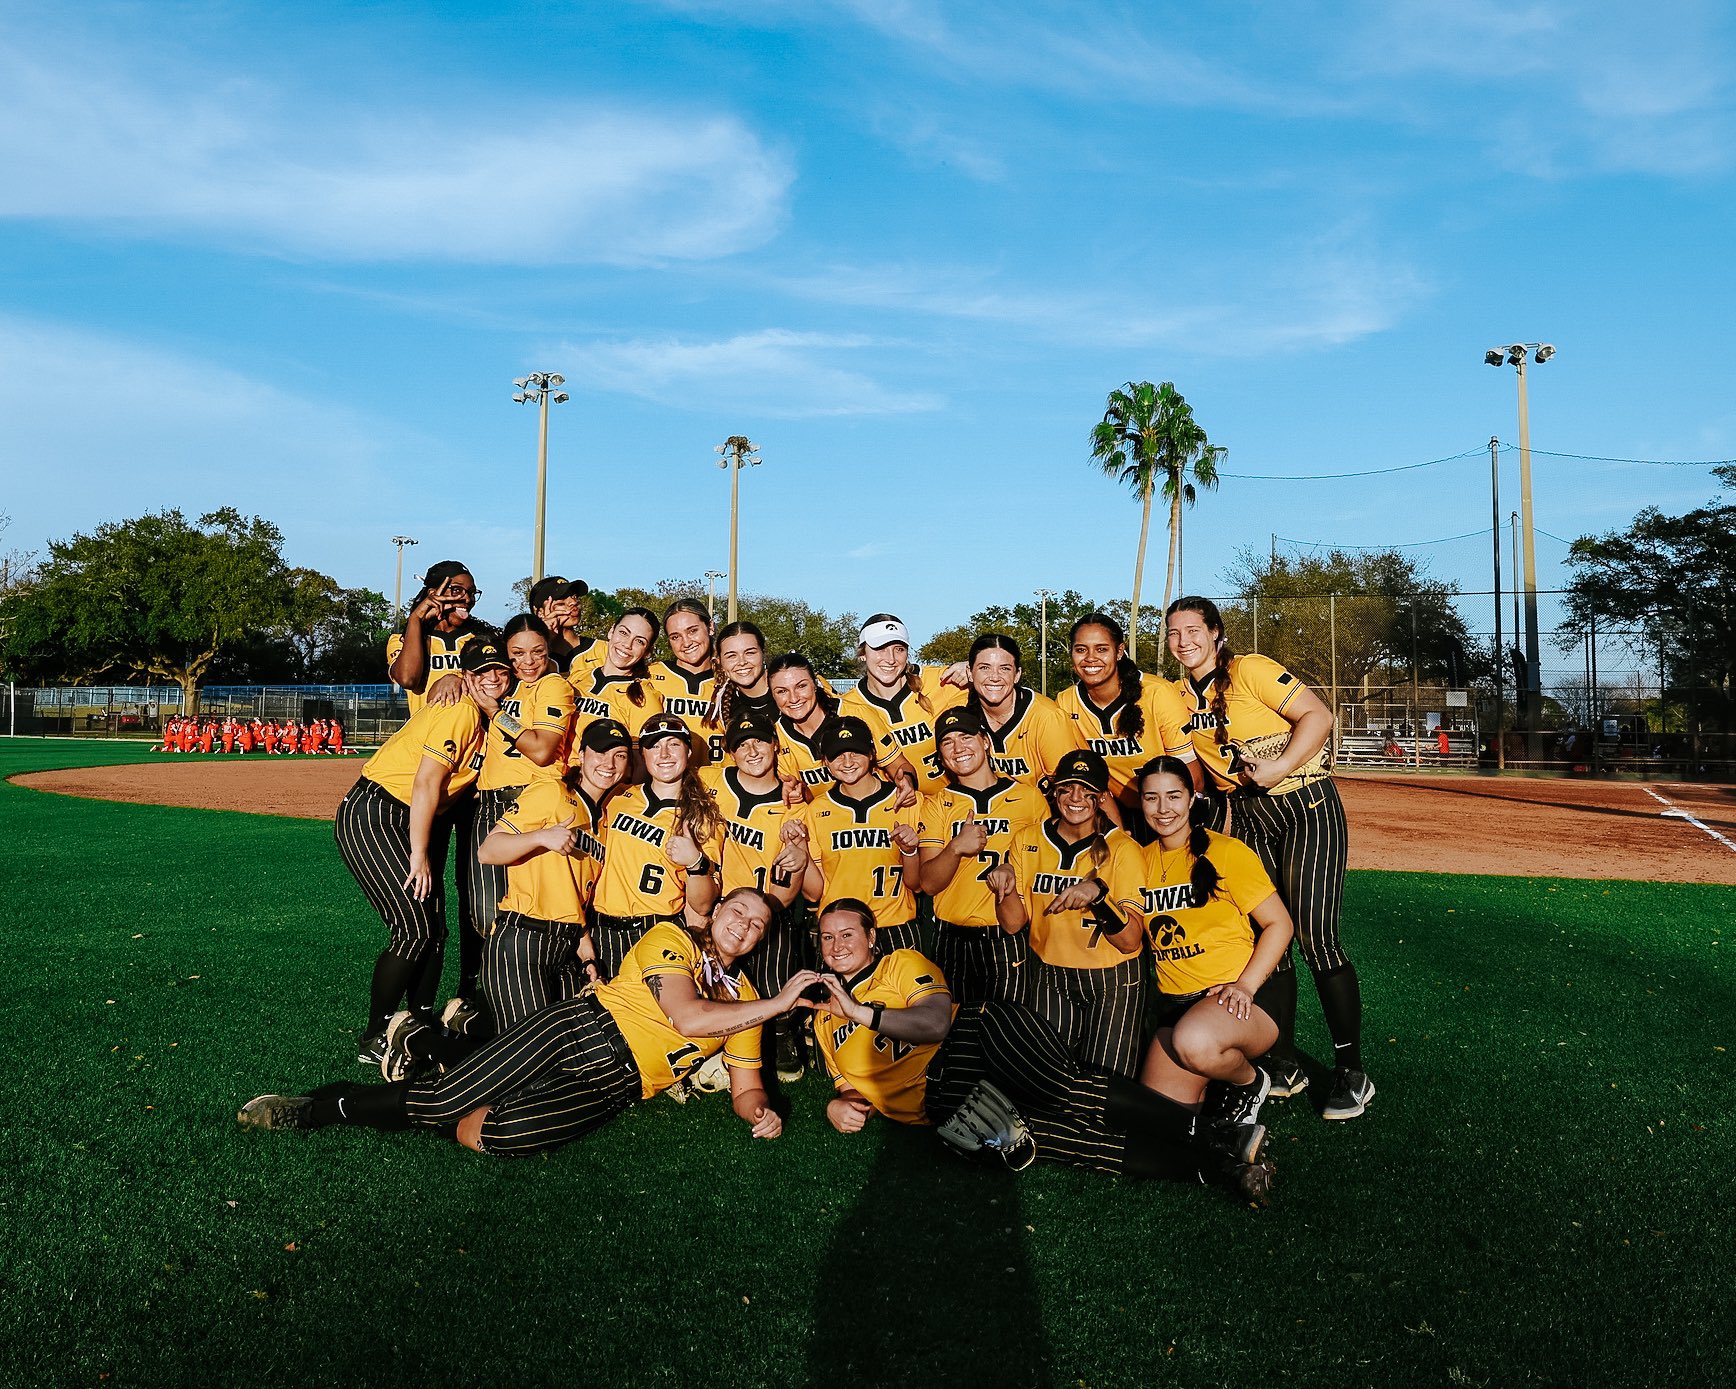 Iowa softball dominates on opening day in Florida with two shutouts